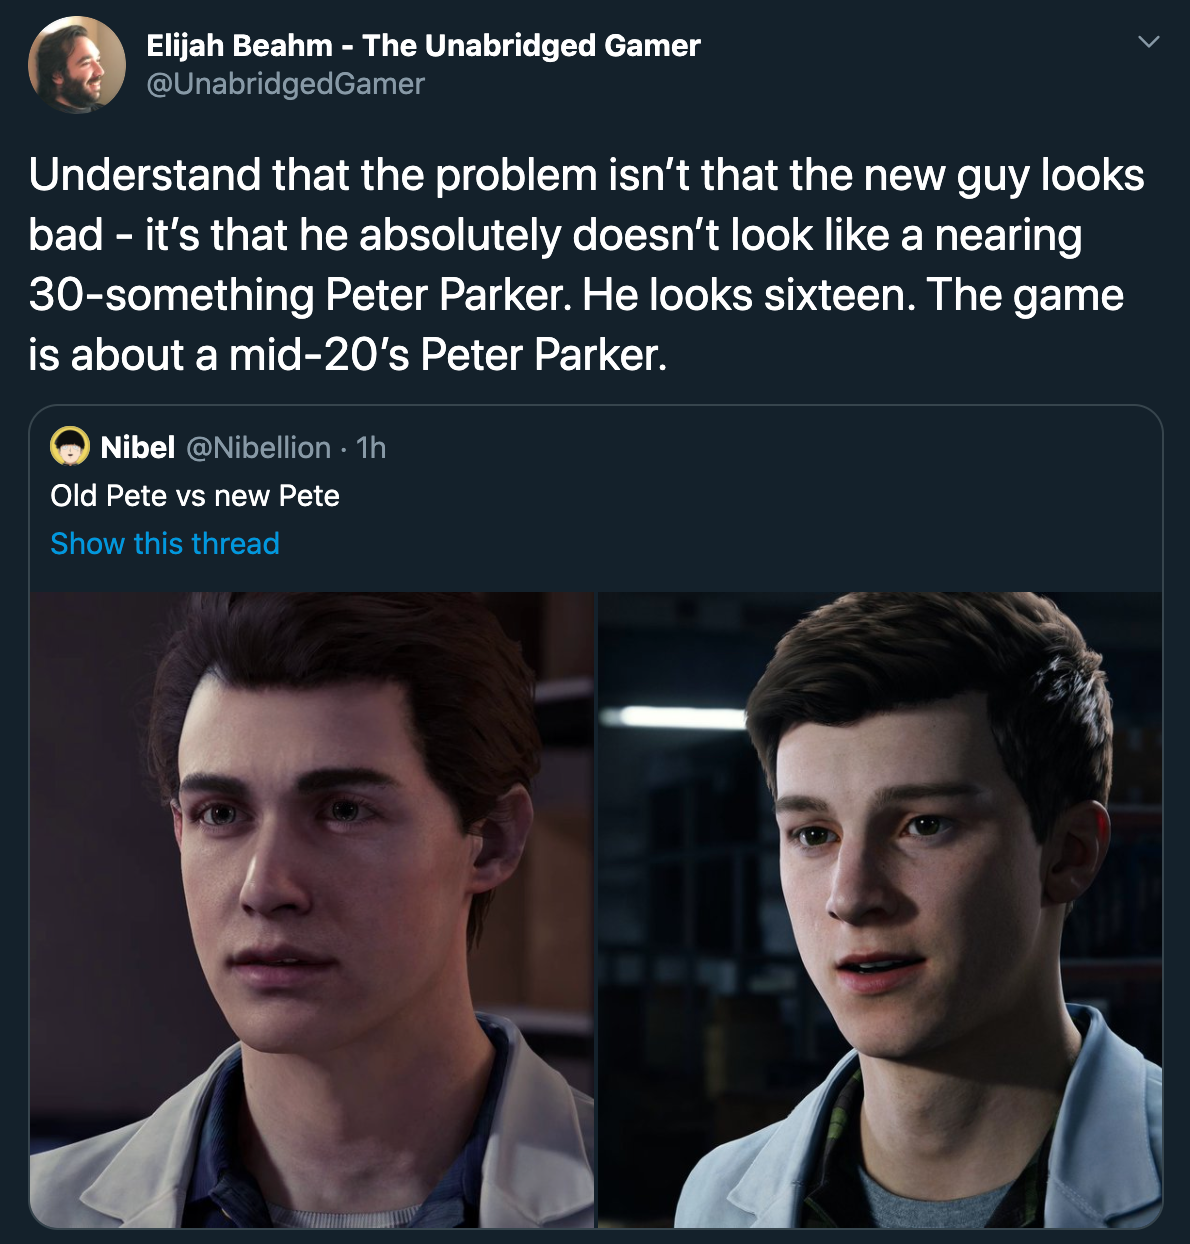 Understand that the problem isn't that the new guy looks bad it's that he absolutely doesn't look like a nearing 30something Peter Parker. He looks sixteen. The game is about a mid20's Peter Parker.